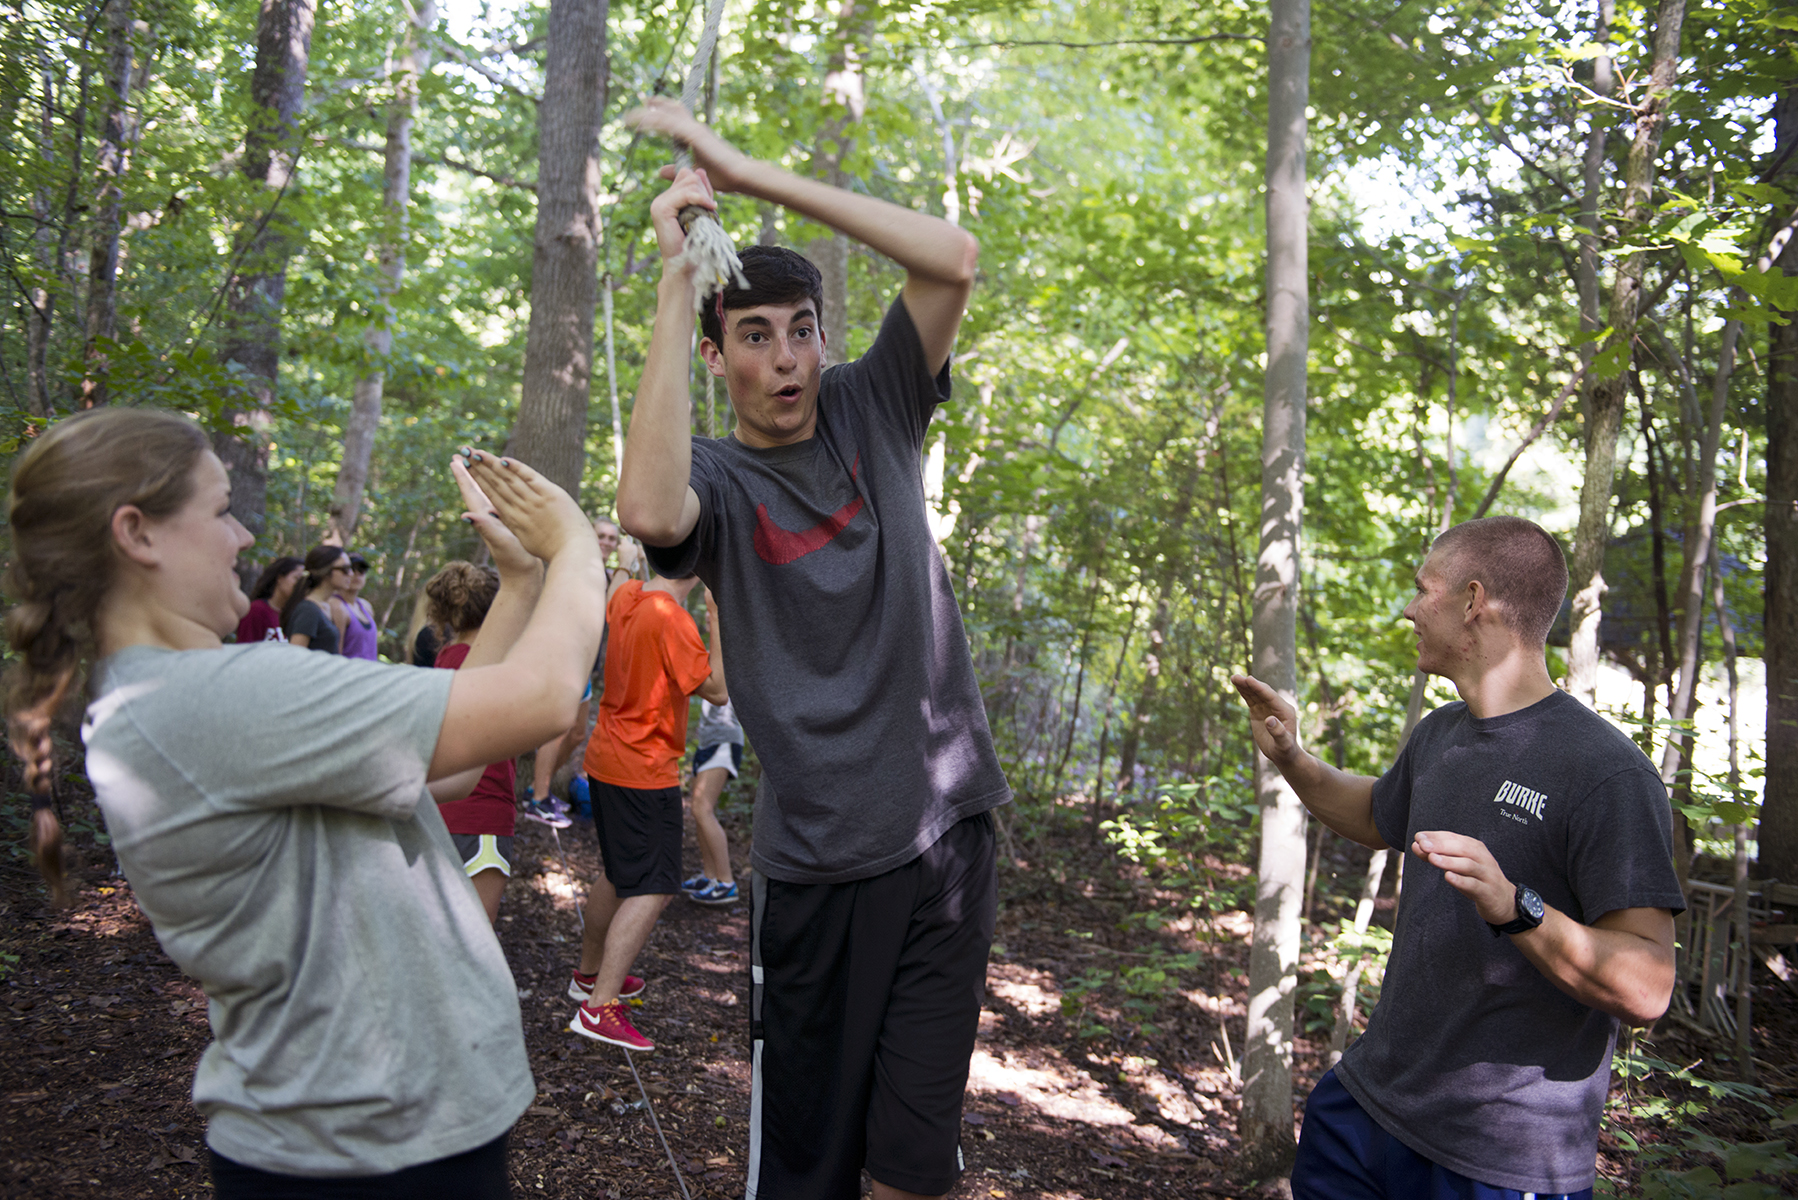 First year students work together to complete Elon University's low-ropes Challenge Course as a group-building exercise.